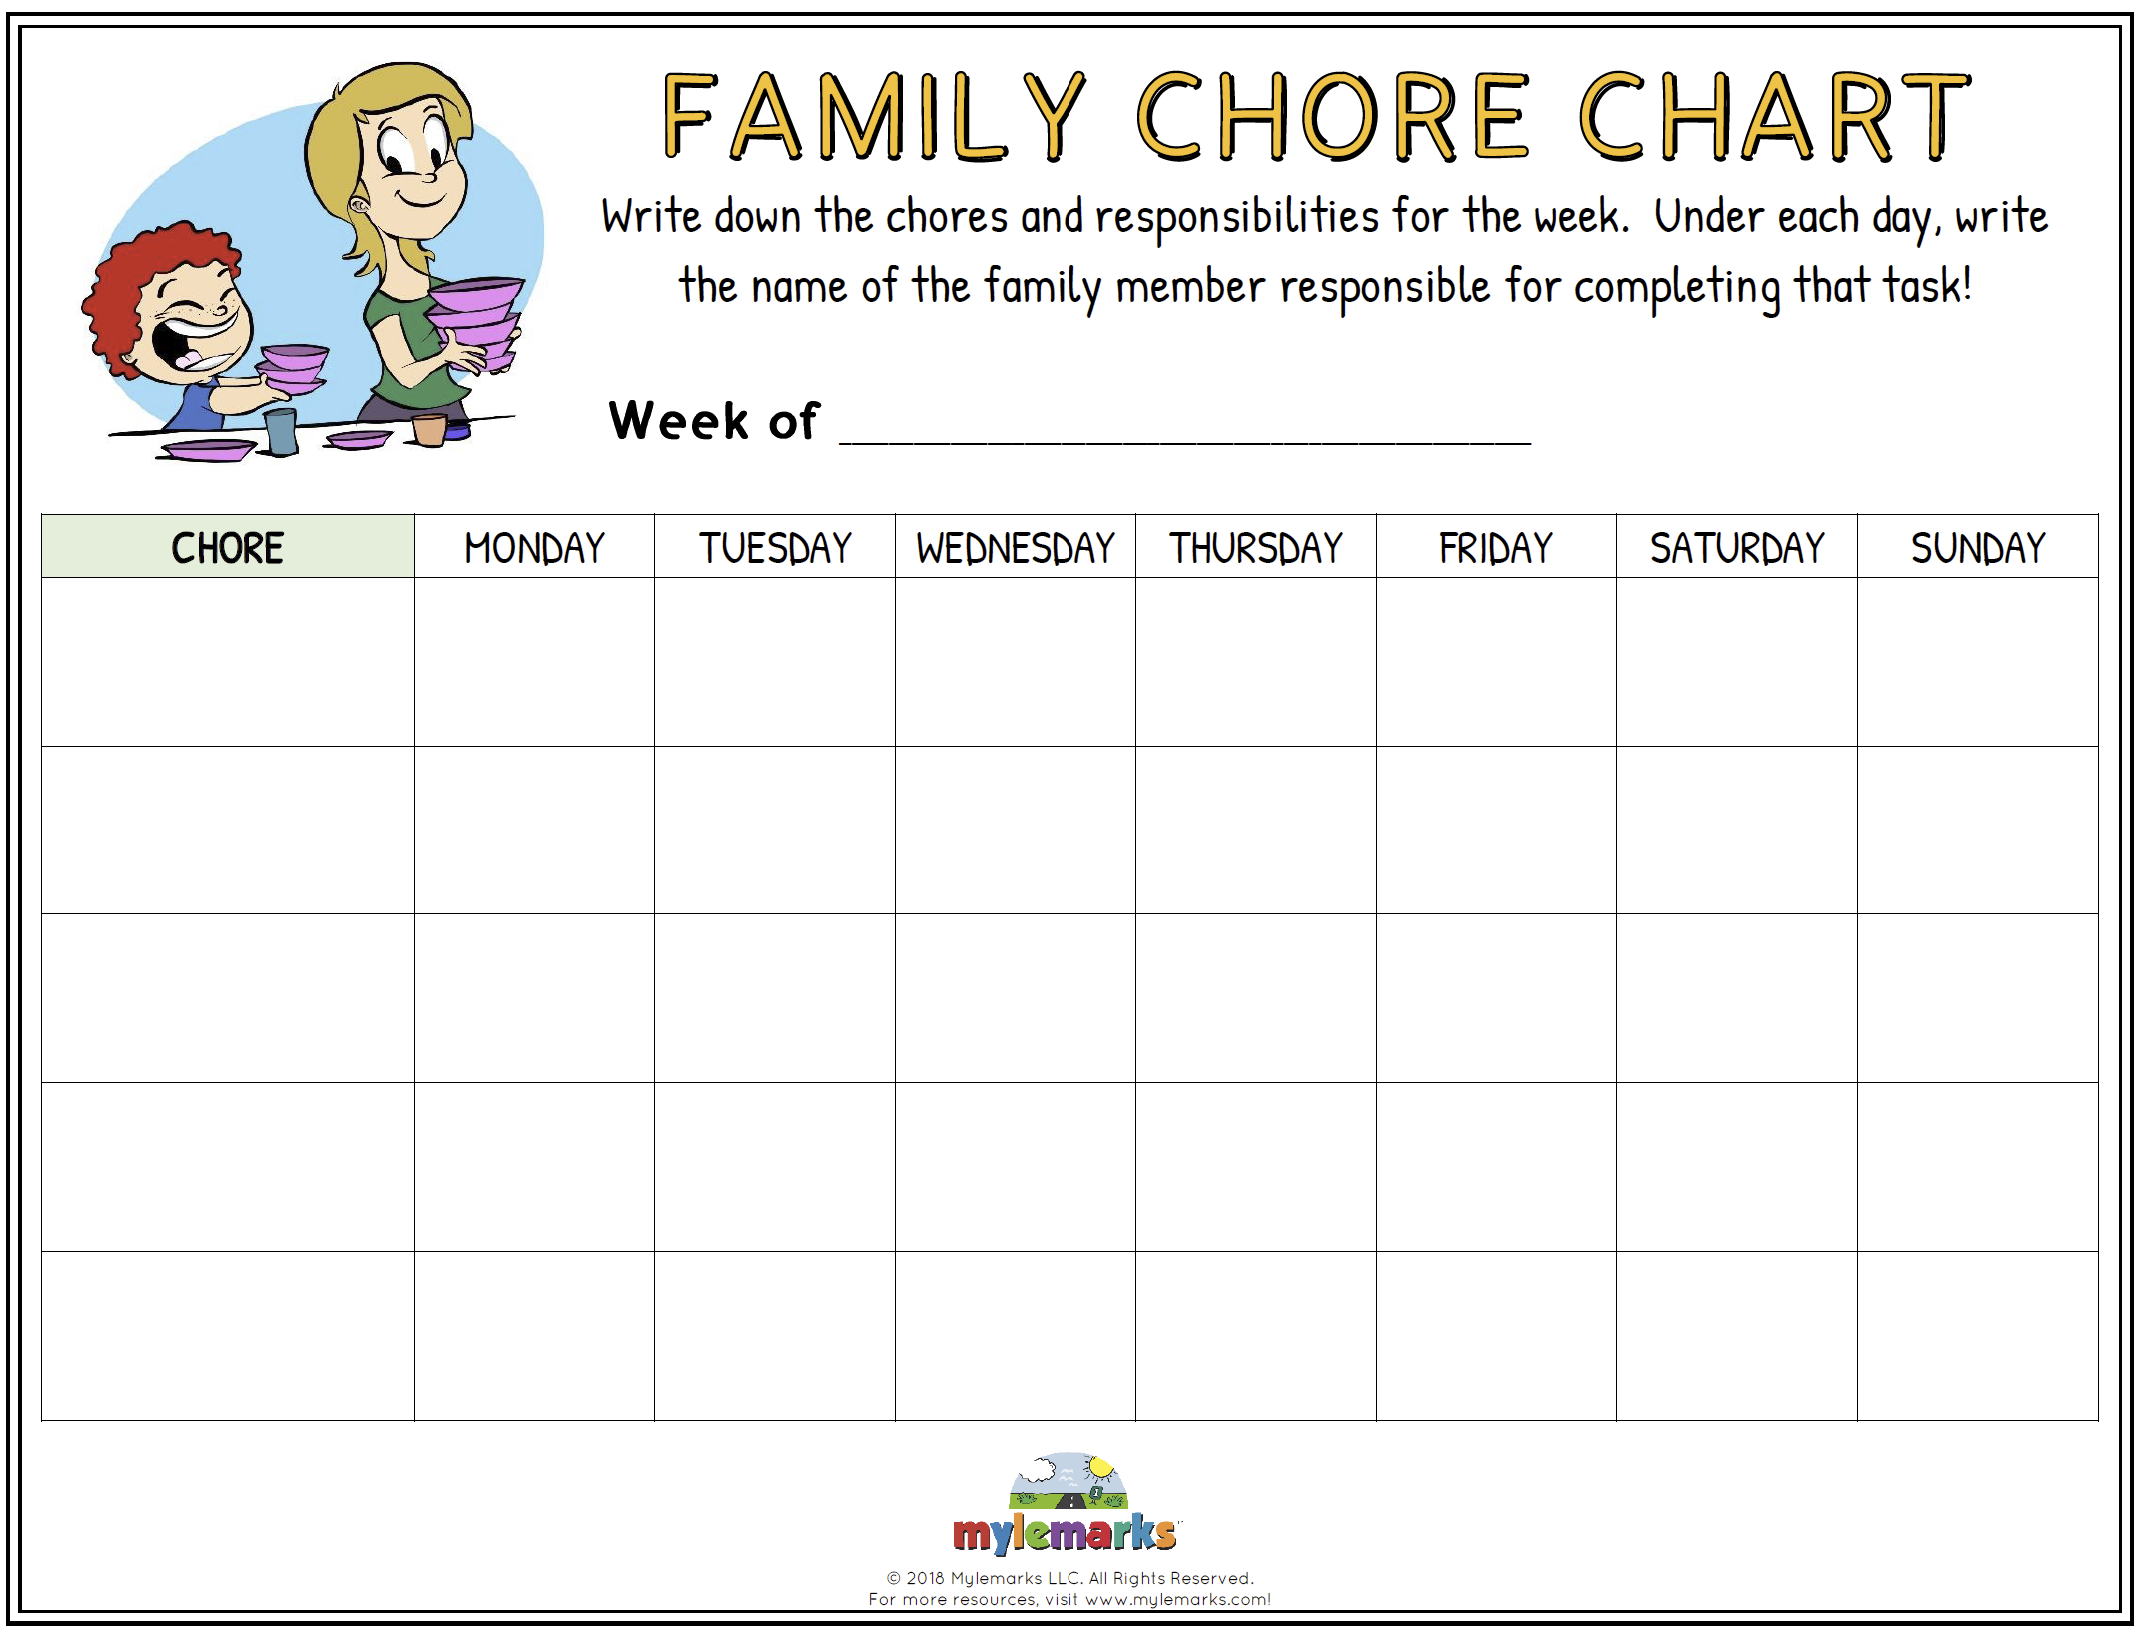 examples-of-chore-charts-for-families-printable-templates-free